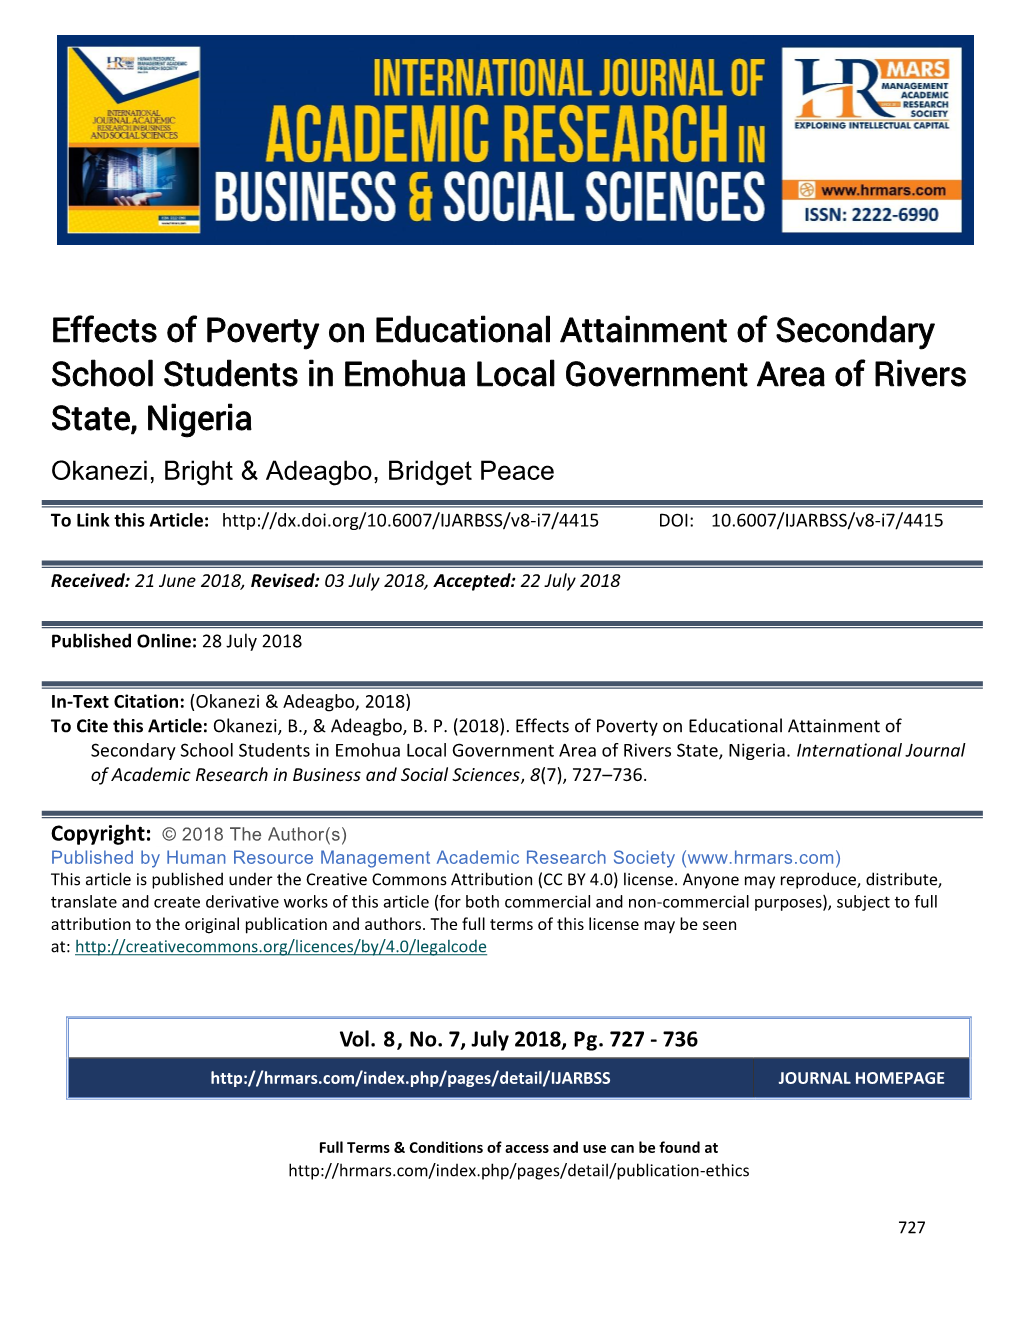 Effects of Poverty on Educational Attainment of Secondary School Students in Emohua Local Government Area of Rivers State, Nigeria